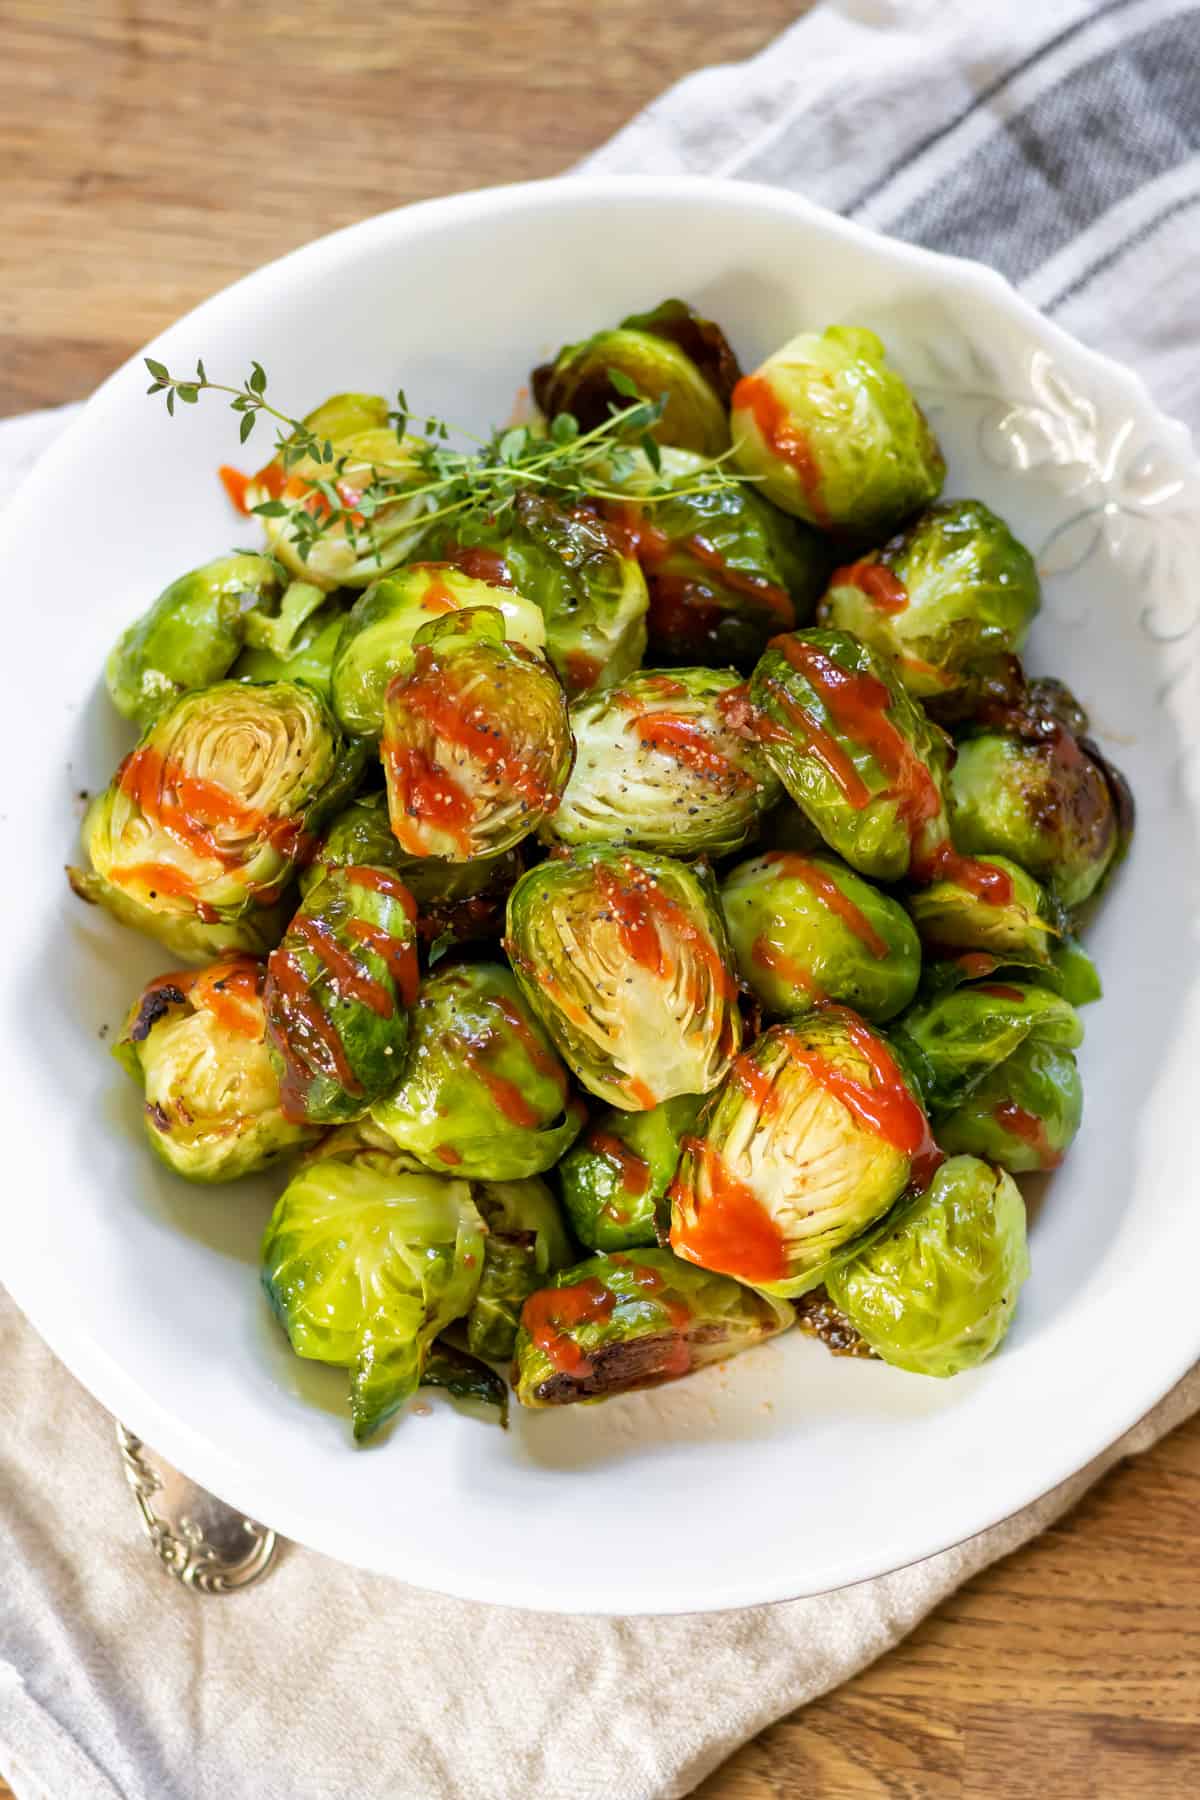 Wooden table with a bowl of roasted honey sriracha brussels sprouts.